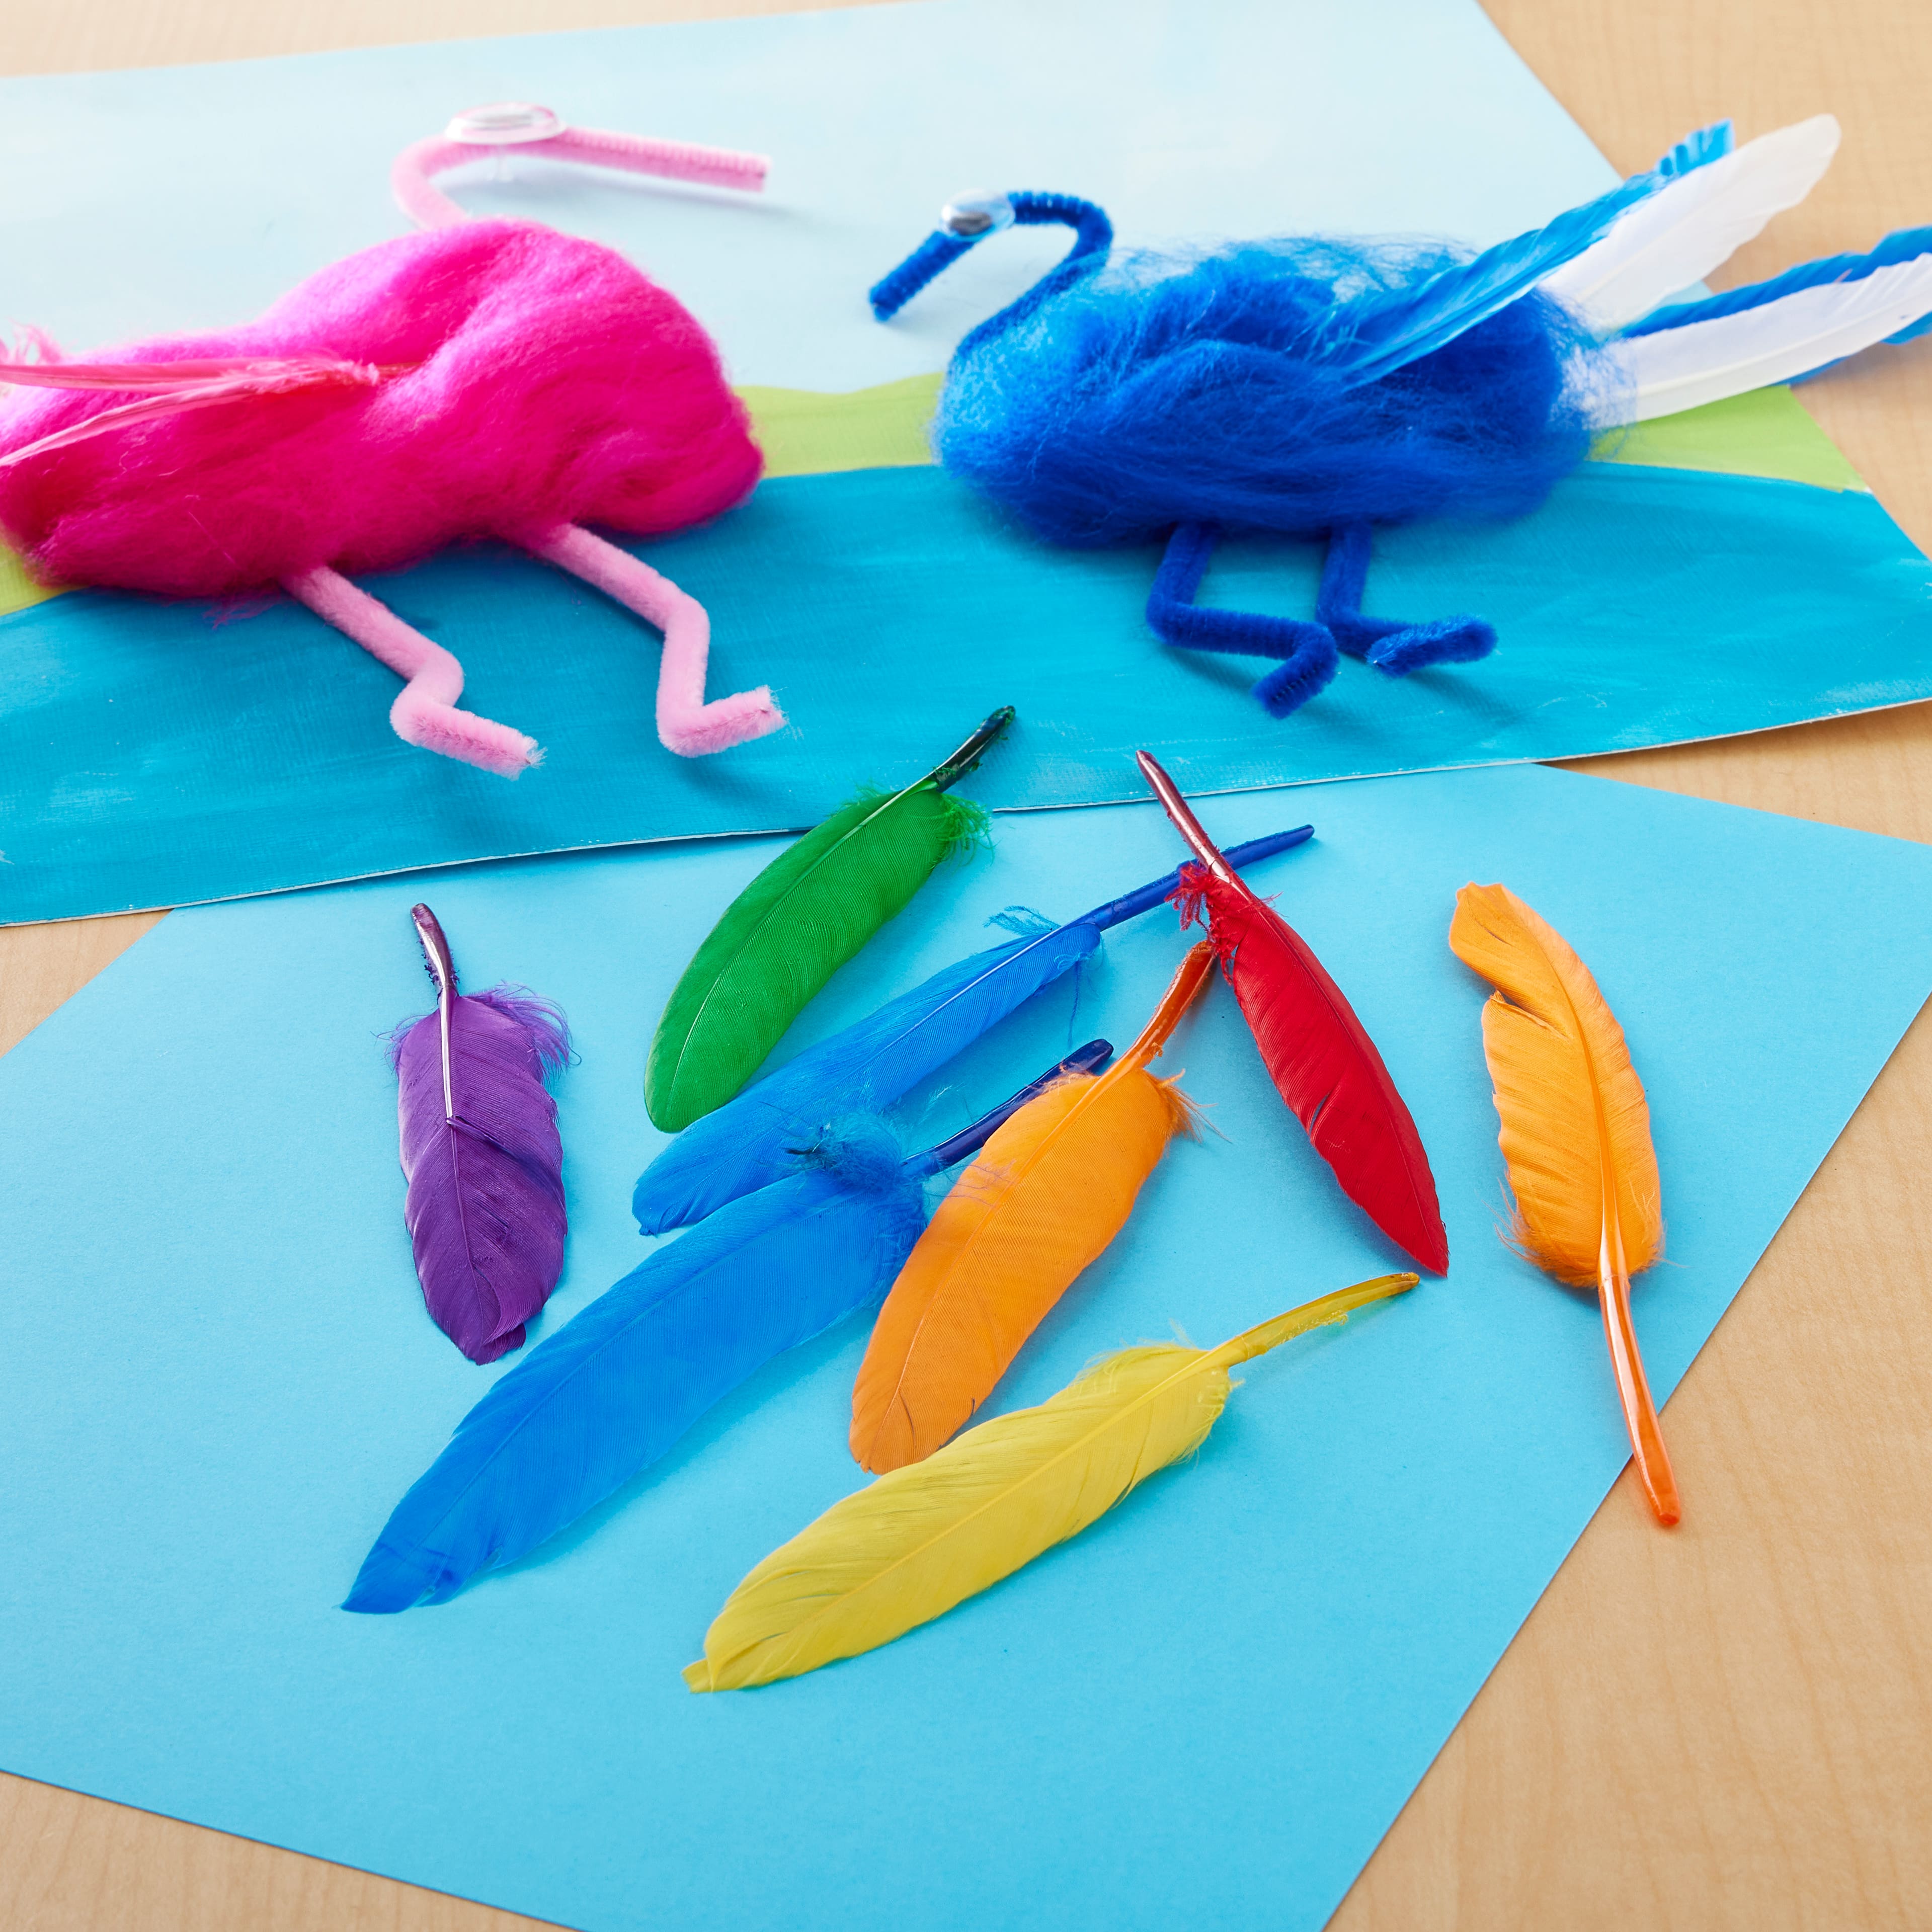 10 Fun Feather Crafts For Kids  Feather crafts, Crafts, Crafts for kids